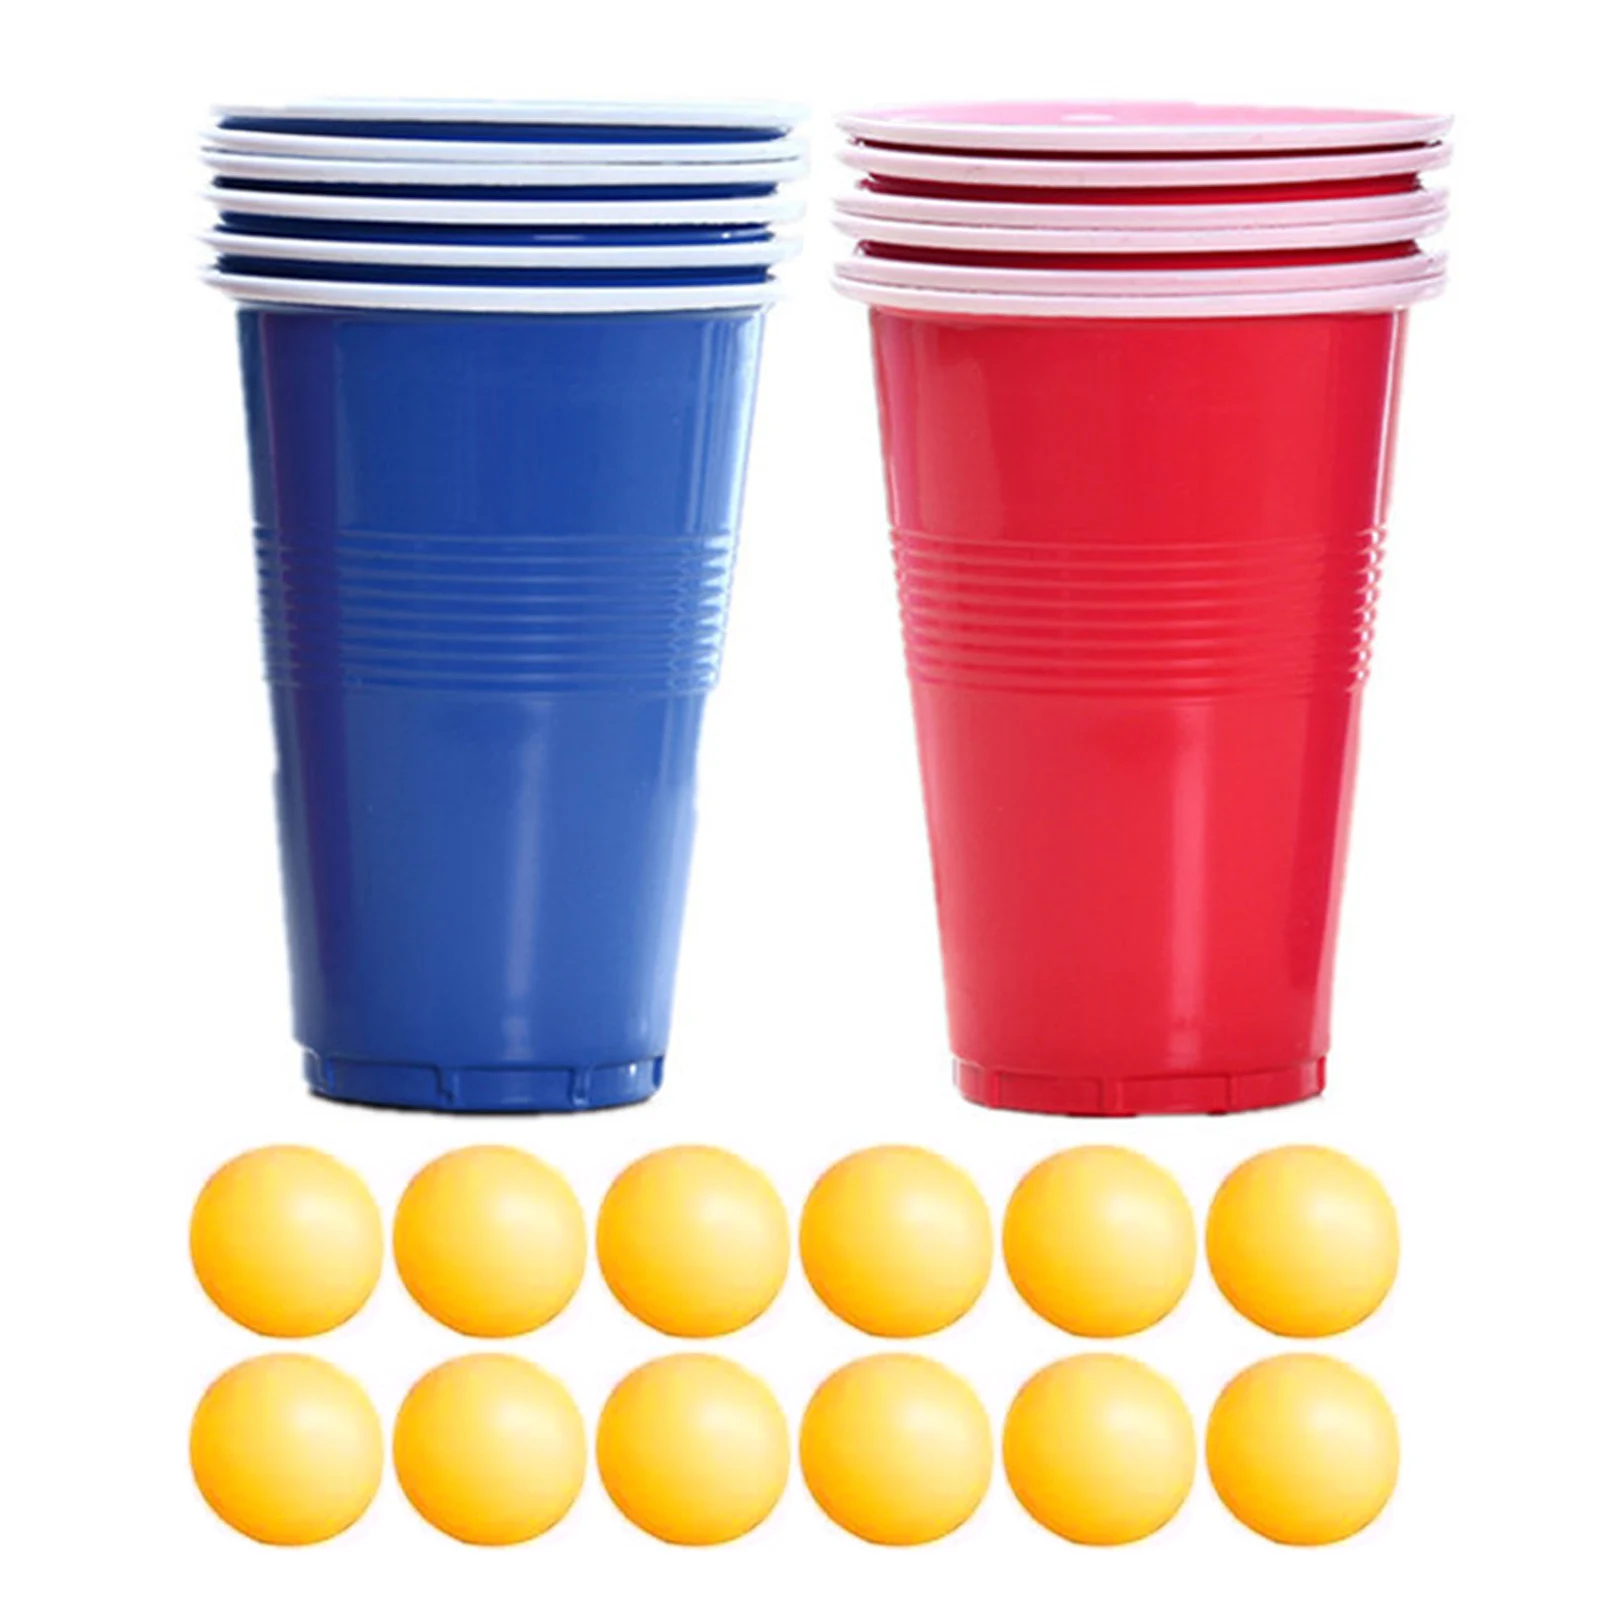 

Party Cups For Games 12-Pcs Party Cups Fun Adult Drinking Game For Parties Red And Blue Cups Perfect For Birthday Wedding